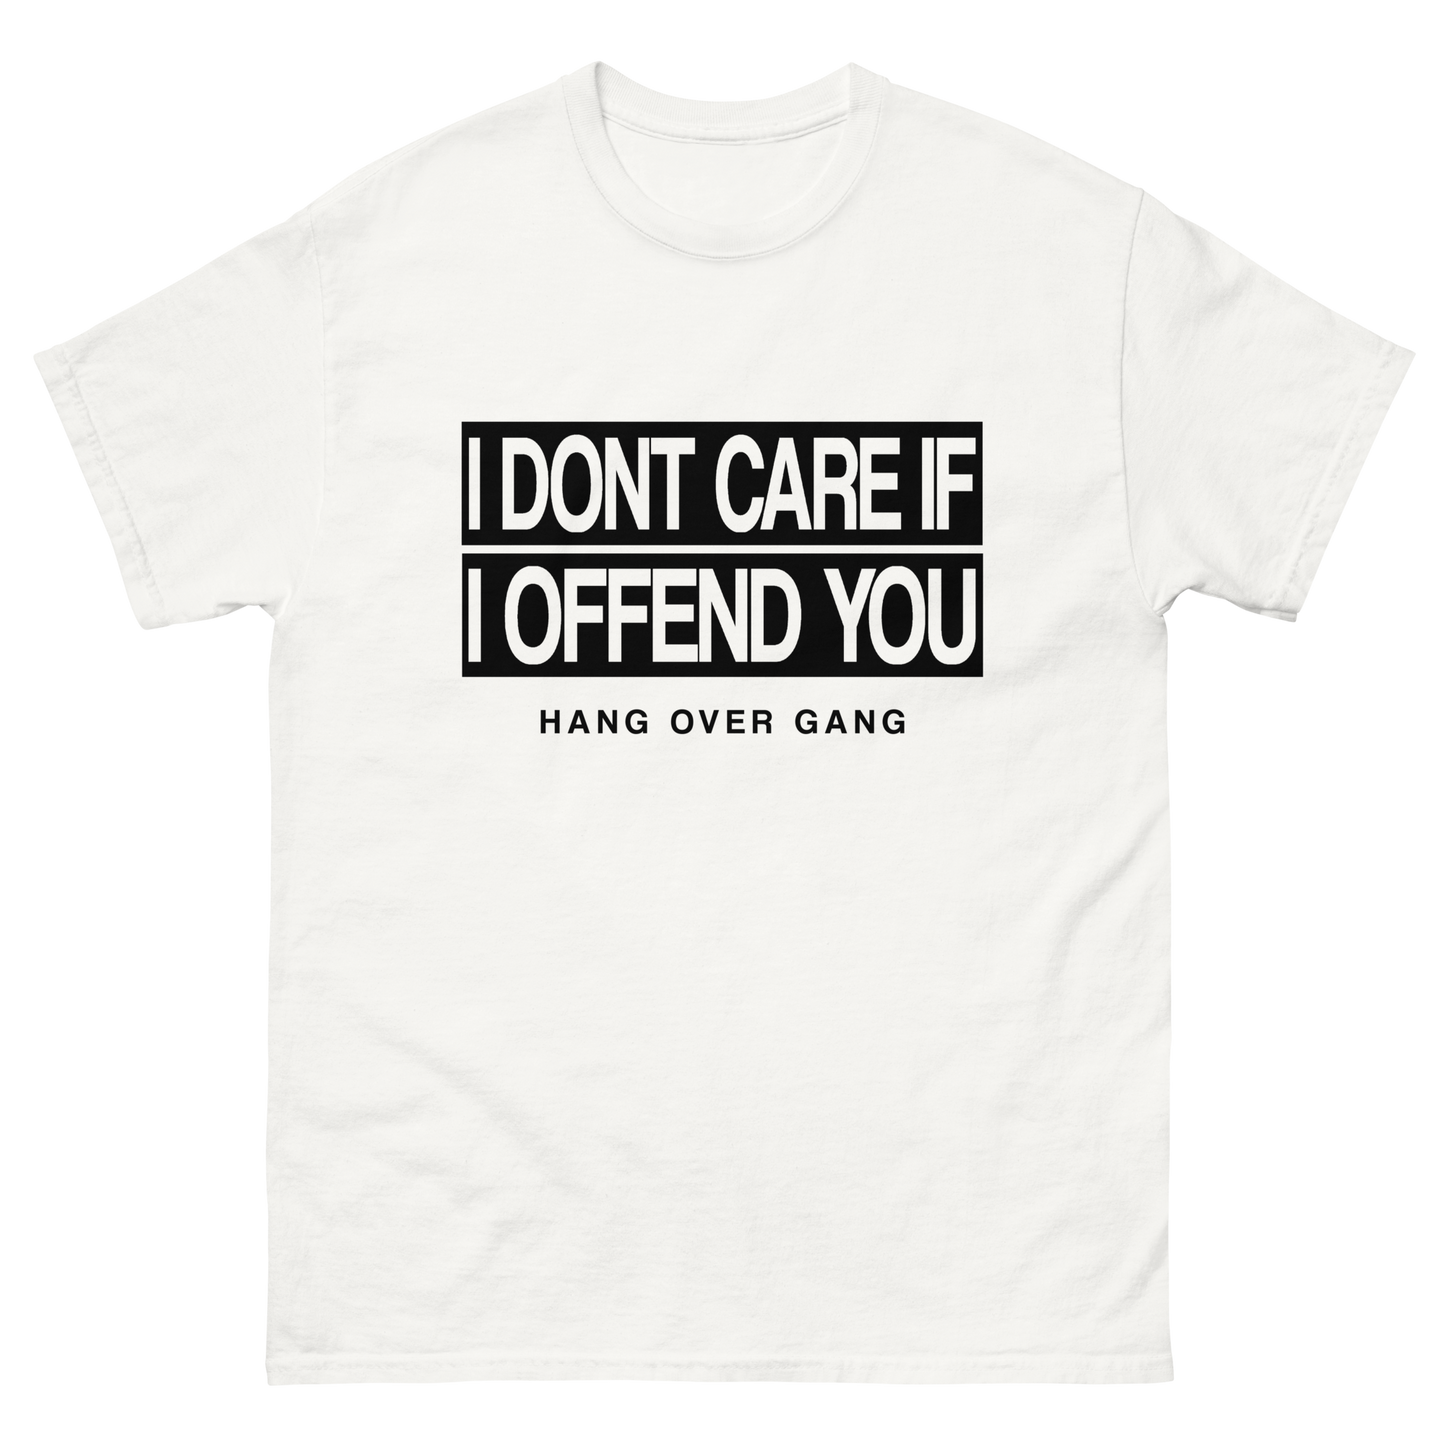 "I Dont Care If I Offend You" T-Shirt